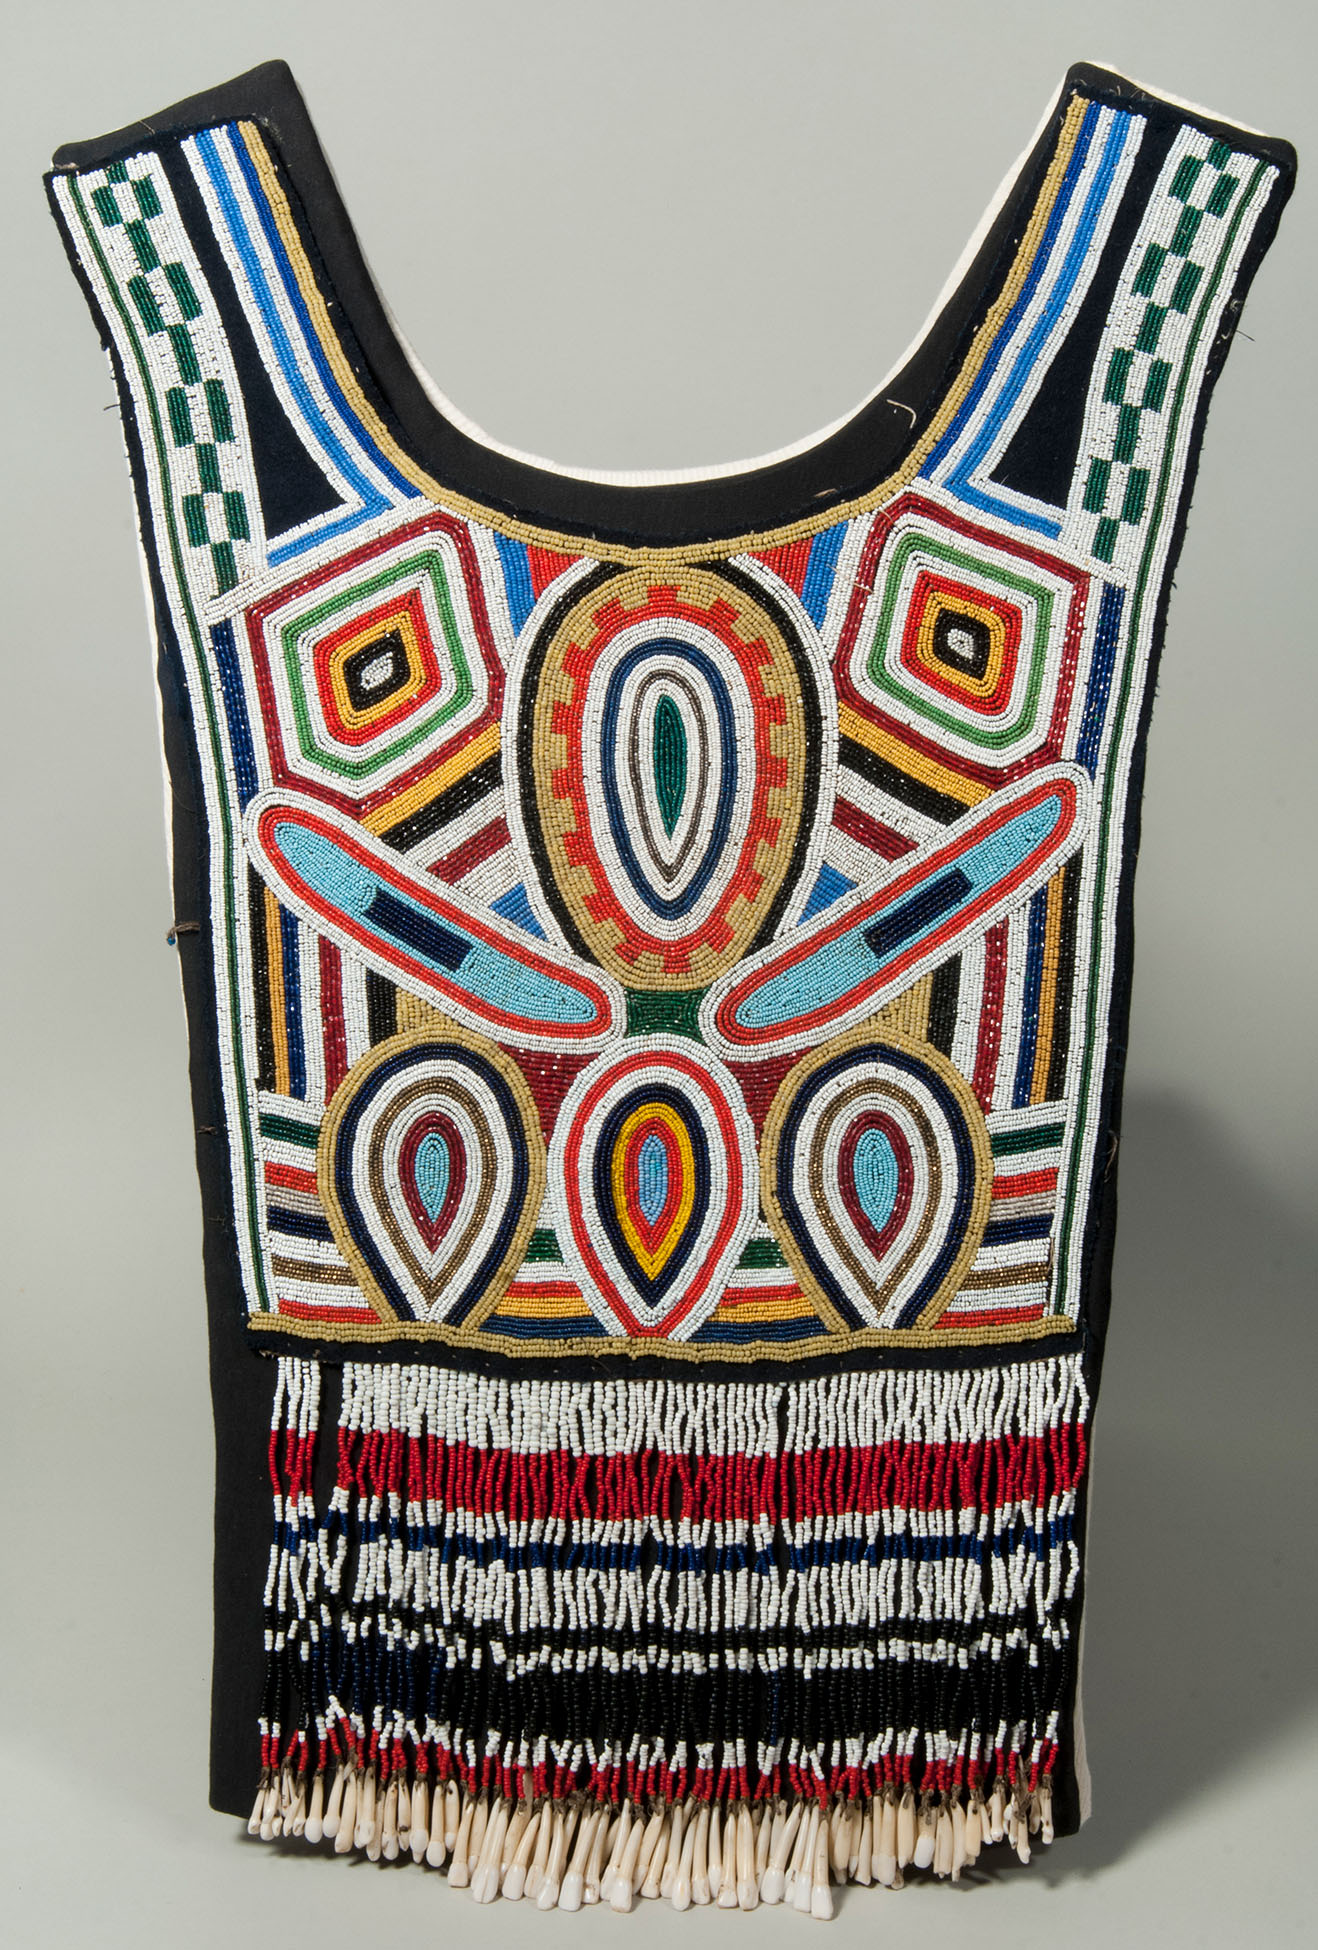 A beaded panel from an Inuit woman's parka, called a Tuilik. The beading pattern centers on concentric ovals with each ring a different colour of beads, including vibrant orange, blue, white, red and black